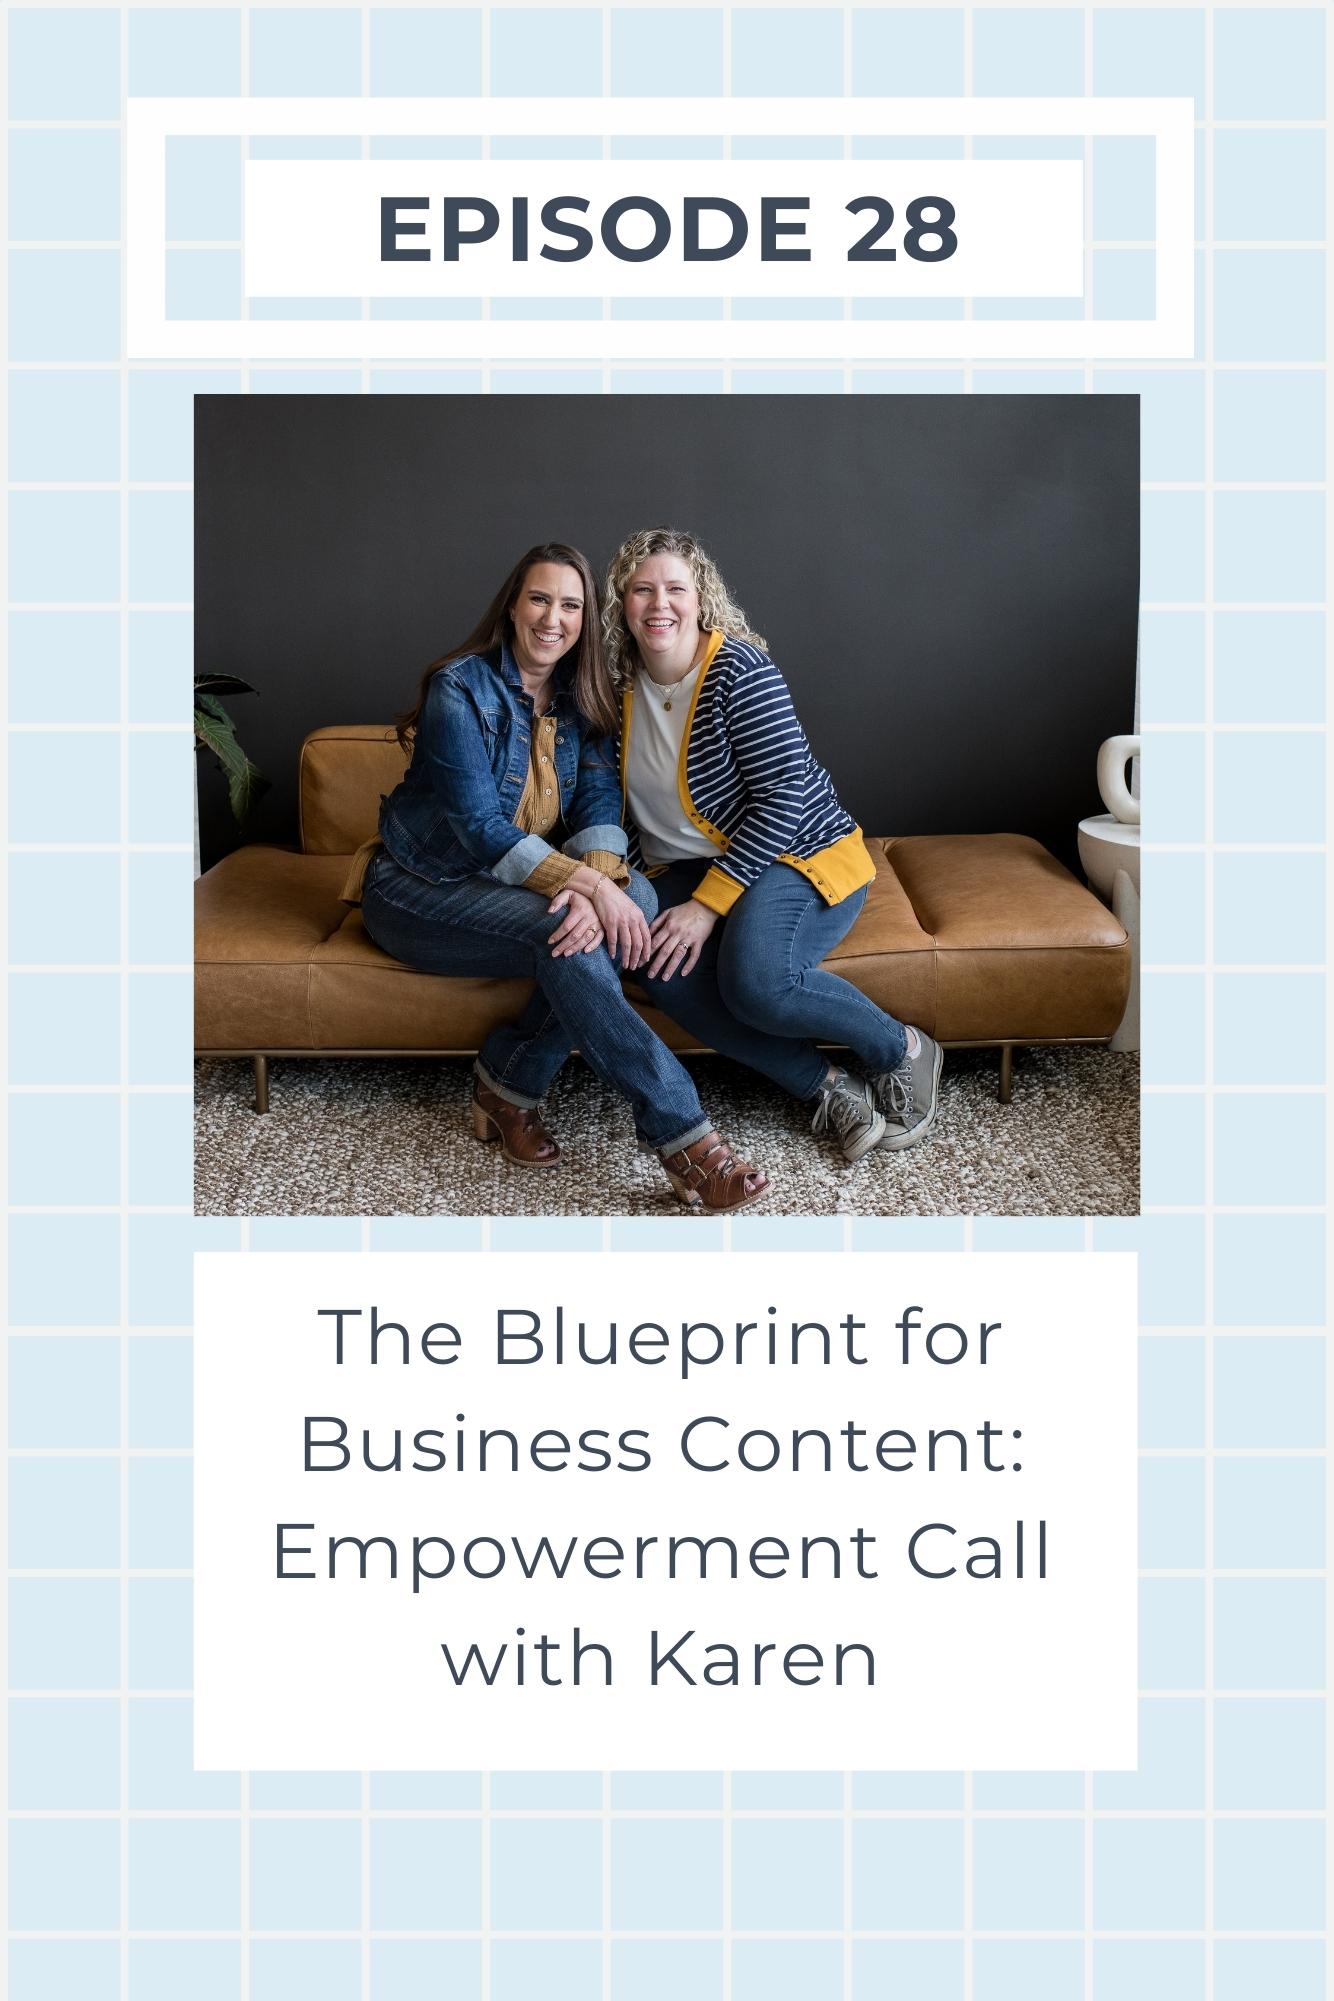 Two Christian podcasters and business women sitting closely together on a couch with a graphic that says the blueprint for business content. An empowerment call with Karen.